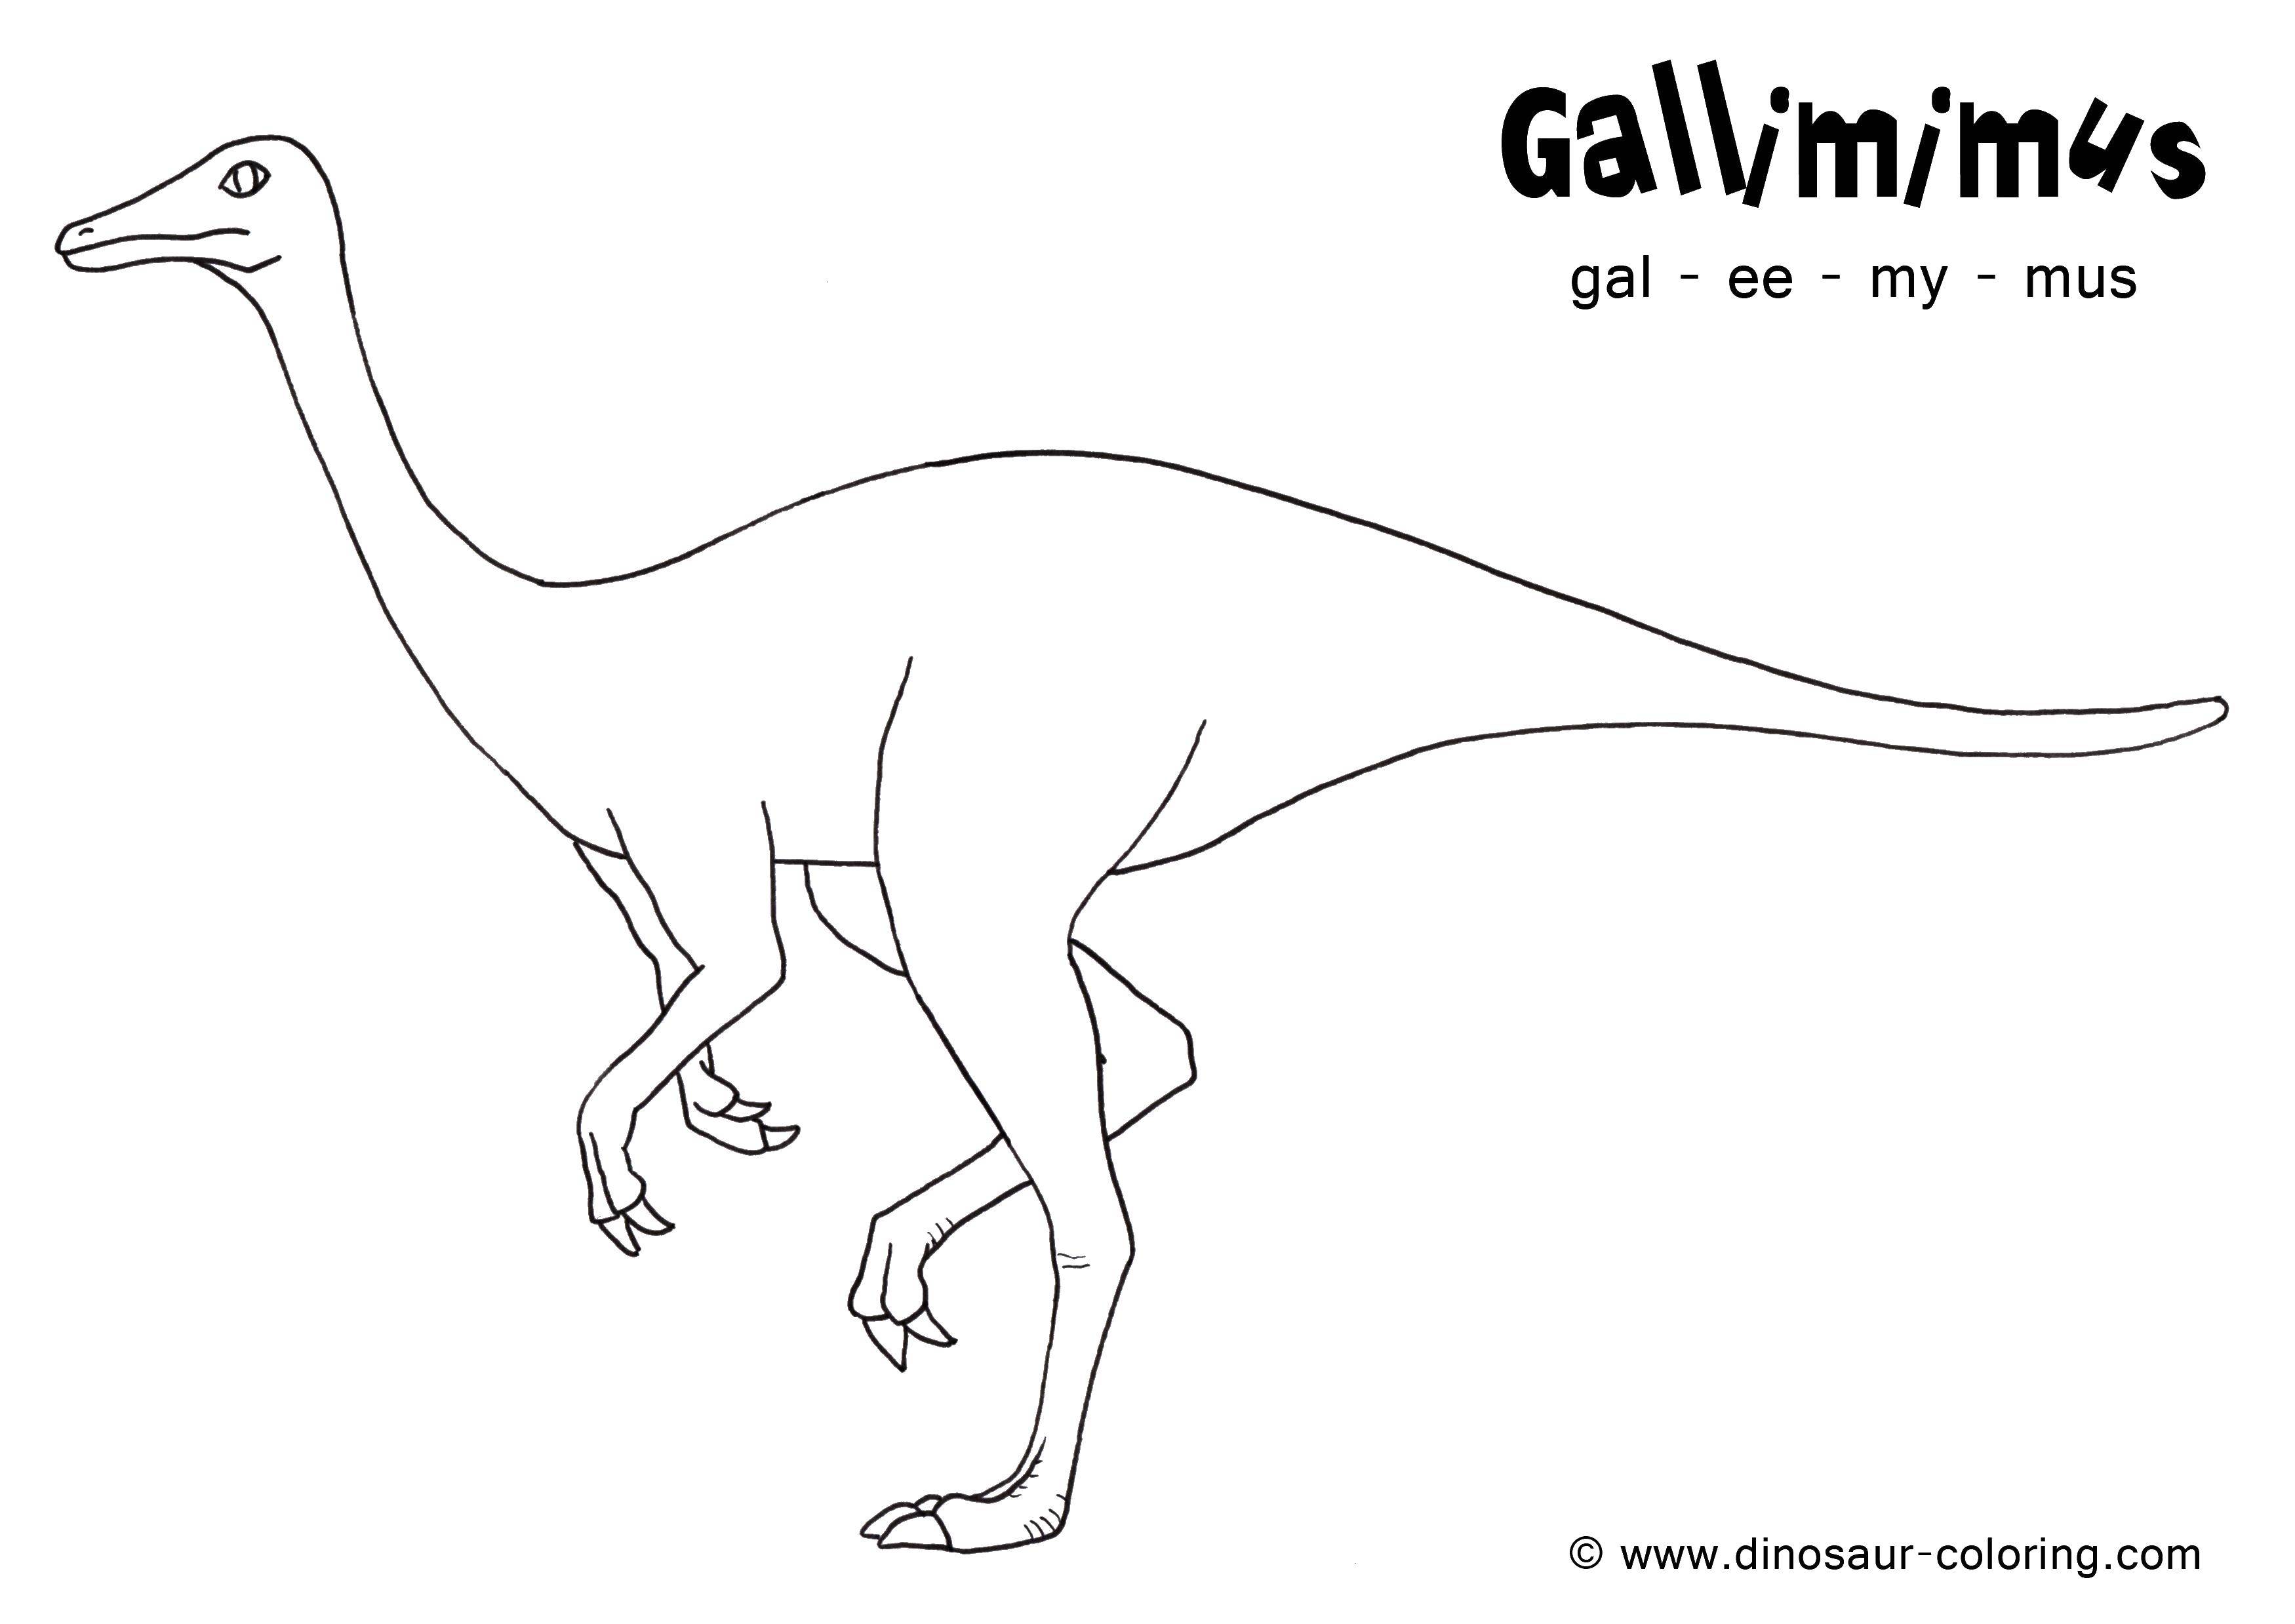 Coloring Gulimim. Category dinosaur. Tags:  Dinosaurs.